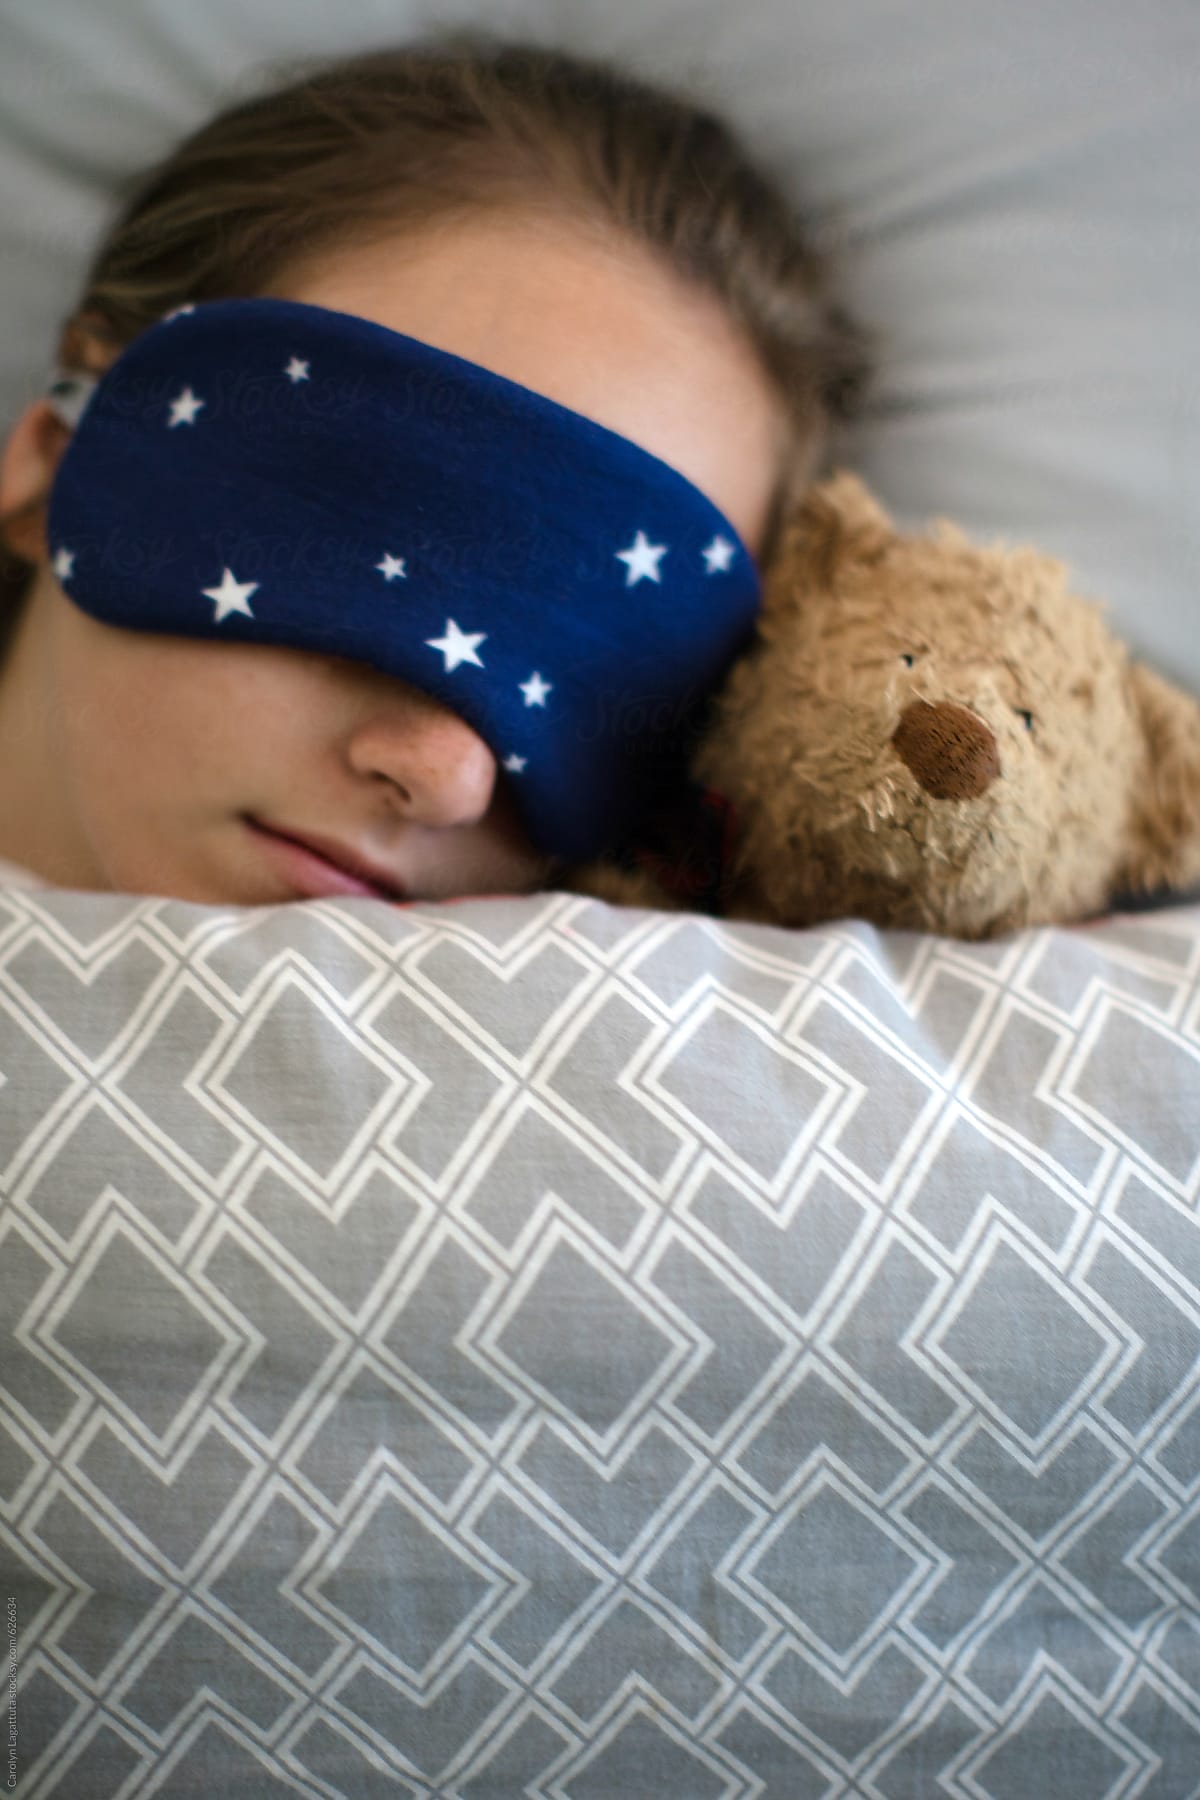 Teenage girl sleeping in bed with her teddy bear and a sleep mask with stars